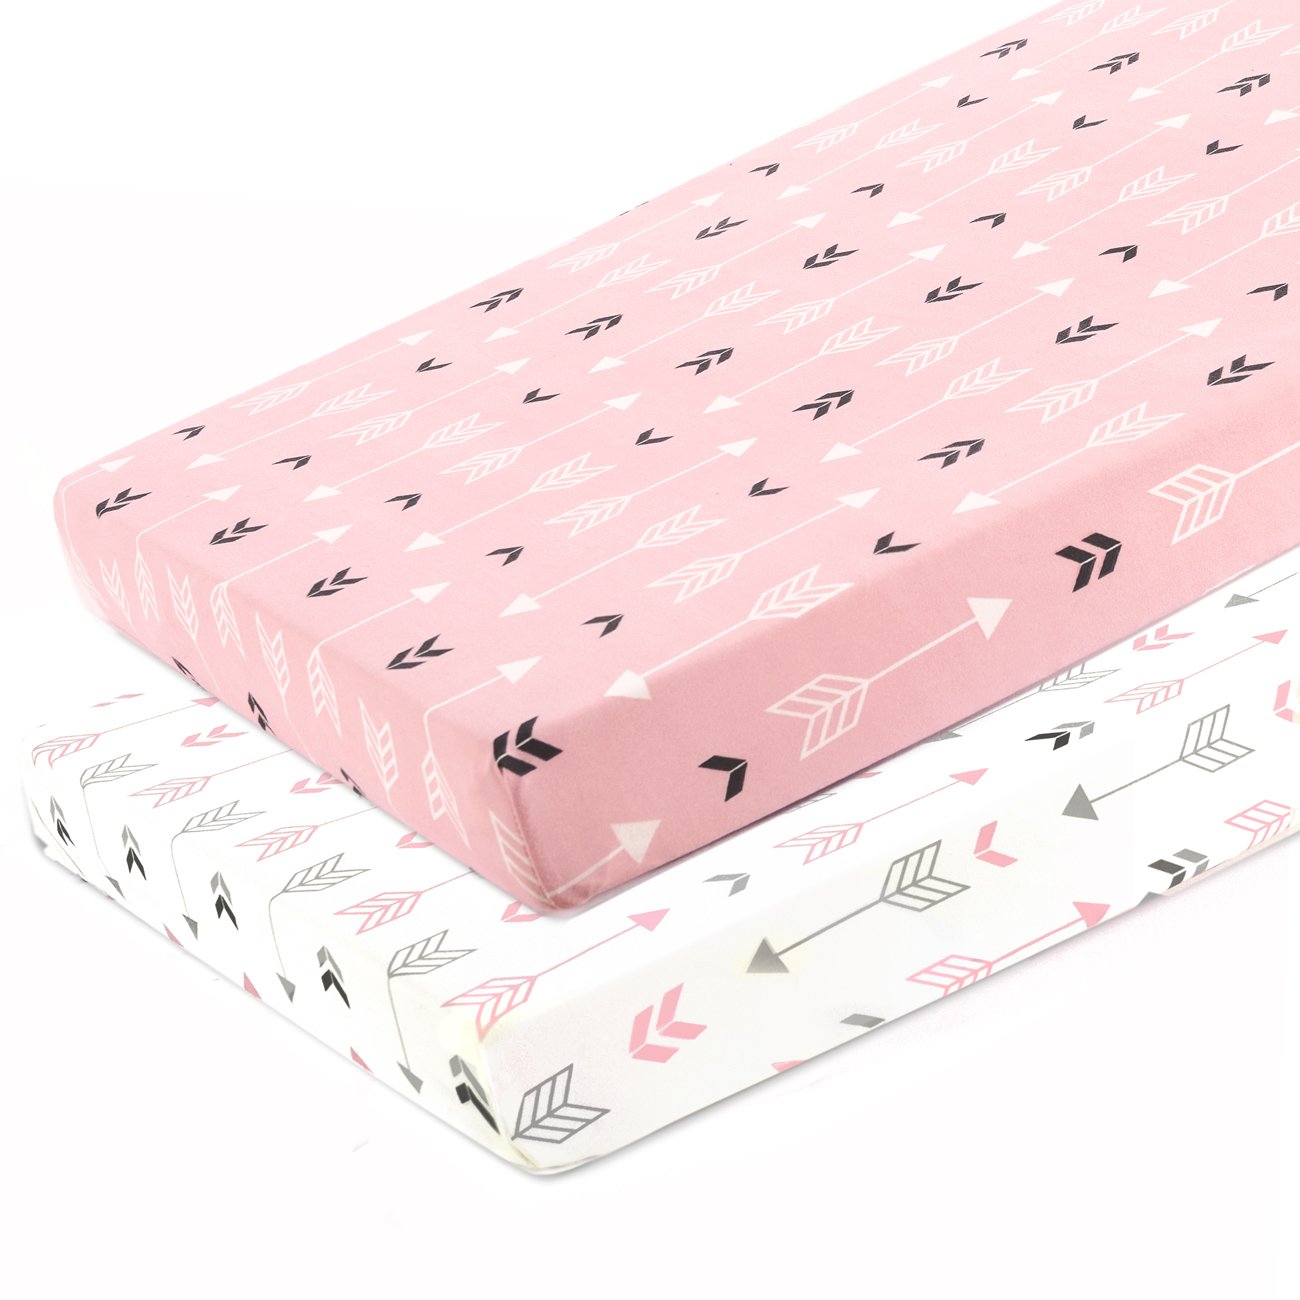 Stretchy Fitted Pack n Play Playard Sheet Set-Brolex 2 Pack Portable Mini Crib Sheets,Convertible Playard Mattress Cover,Ultra Soft Material,Pink & White Arrow Design - image 1 of 2